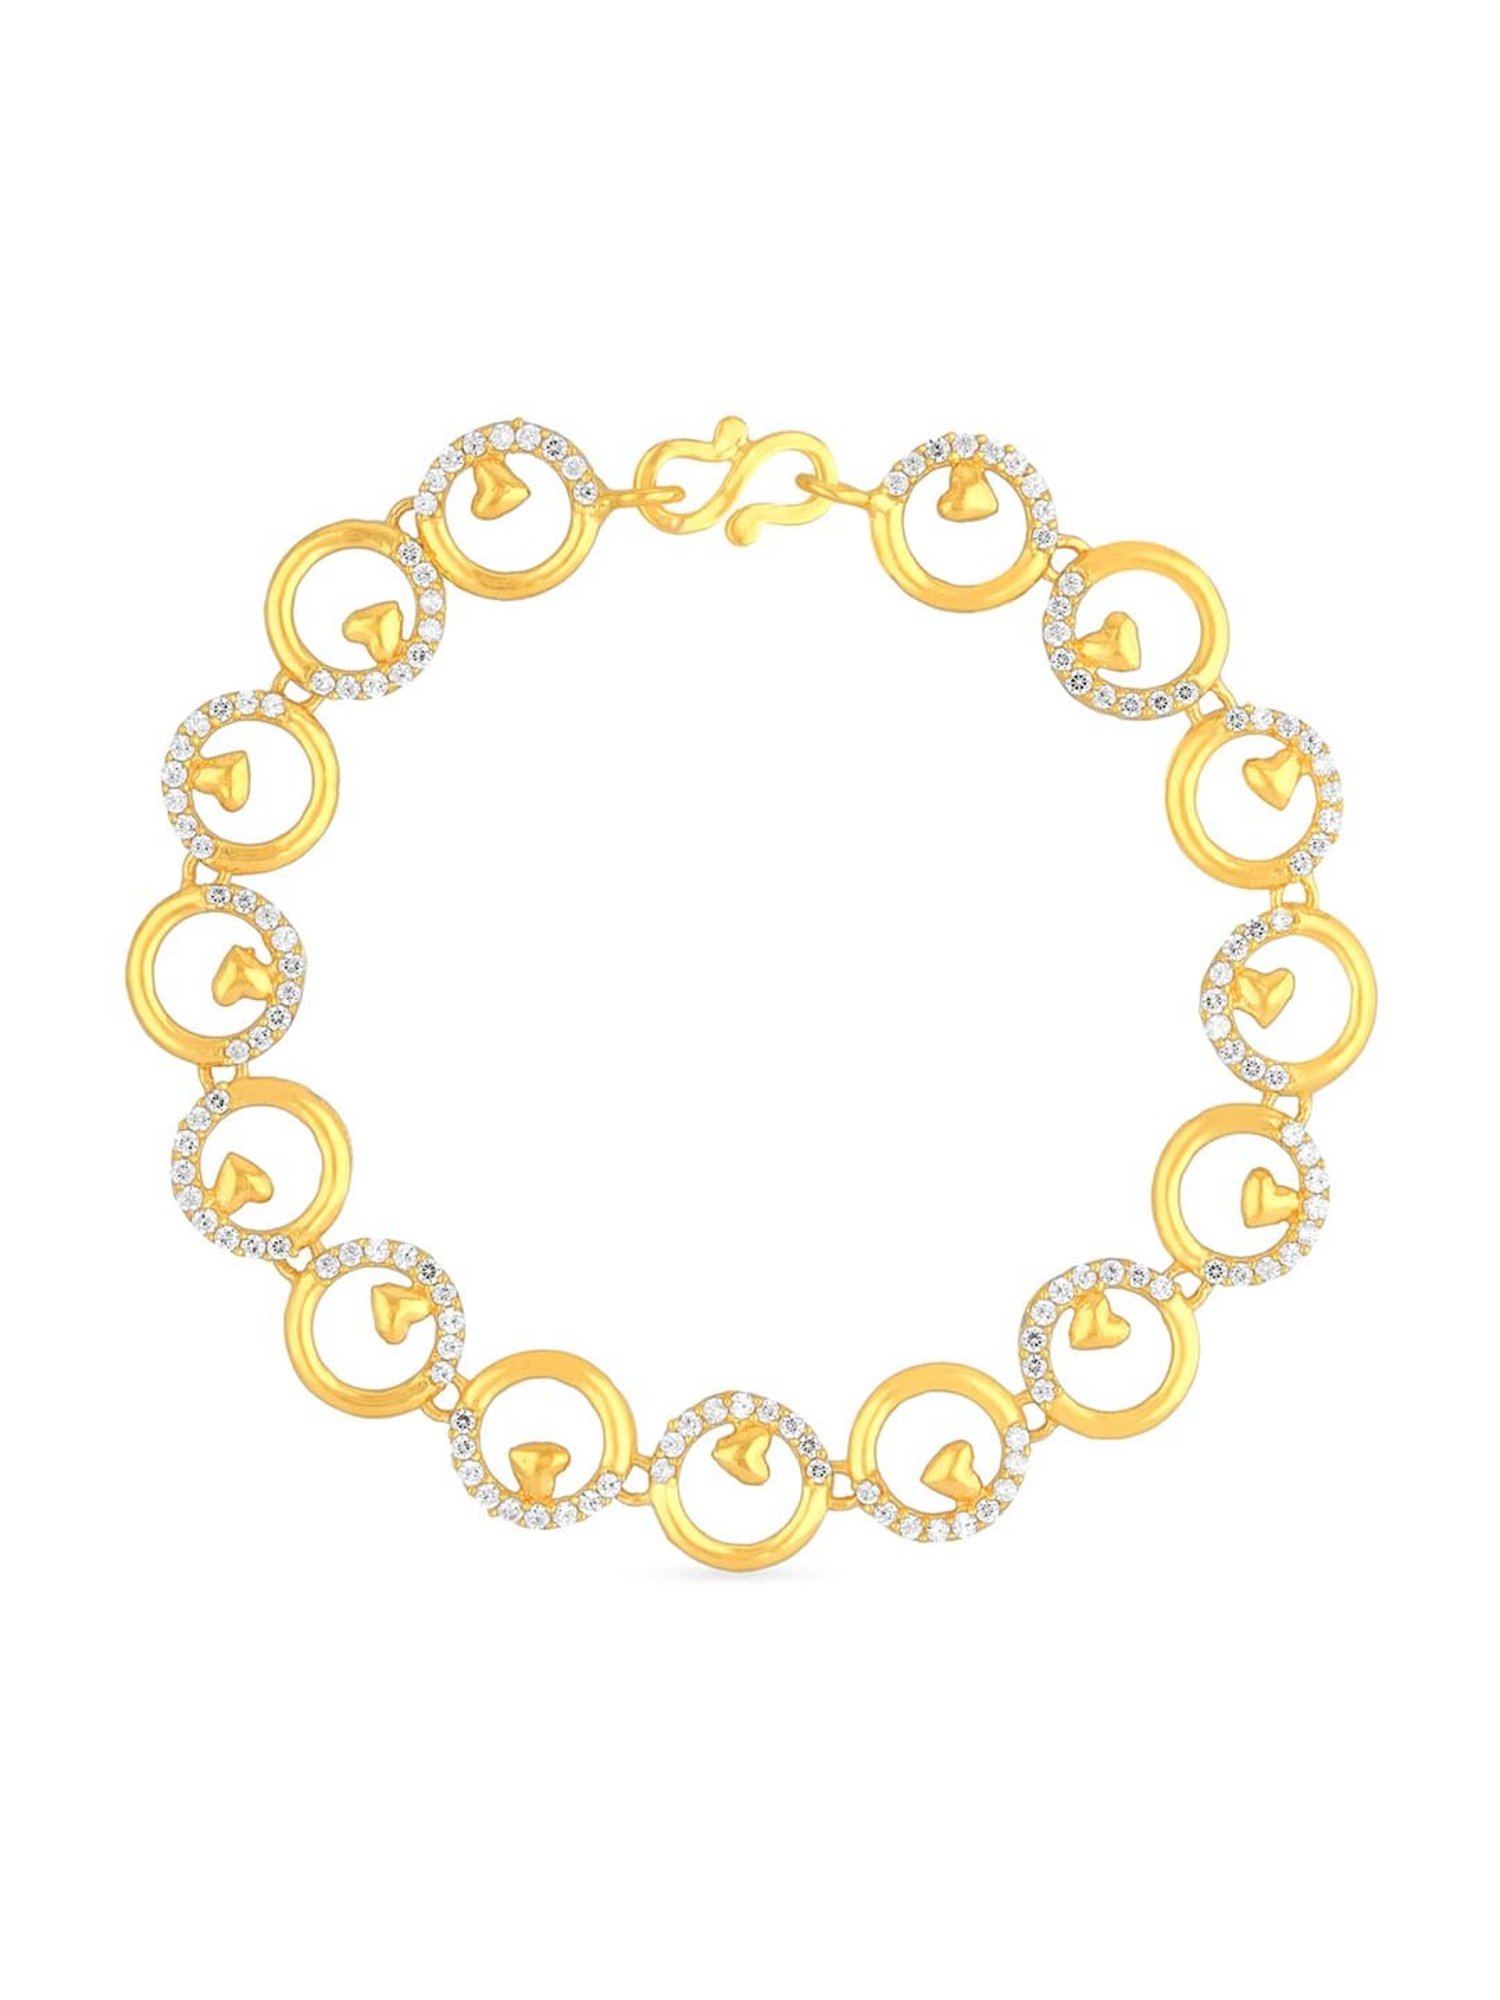 One Gram Gold Bracelet Ladies Light Weight Design For Special Occasions  BRAC210